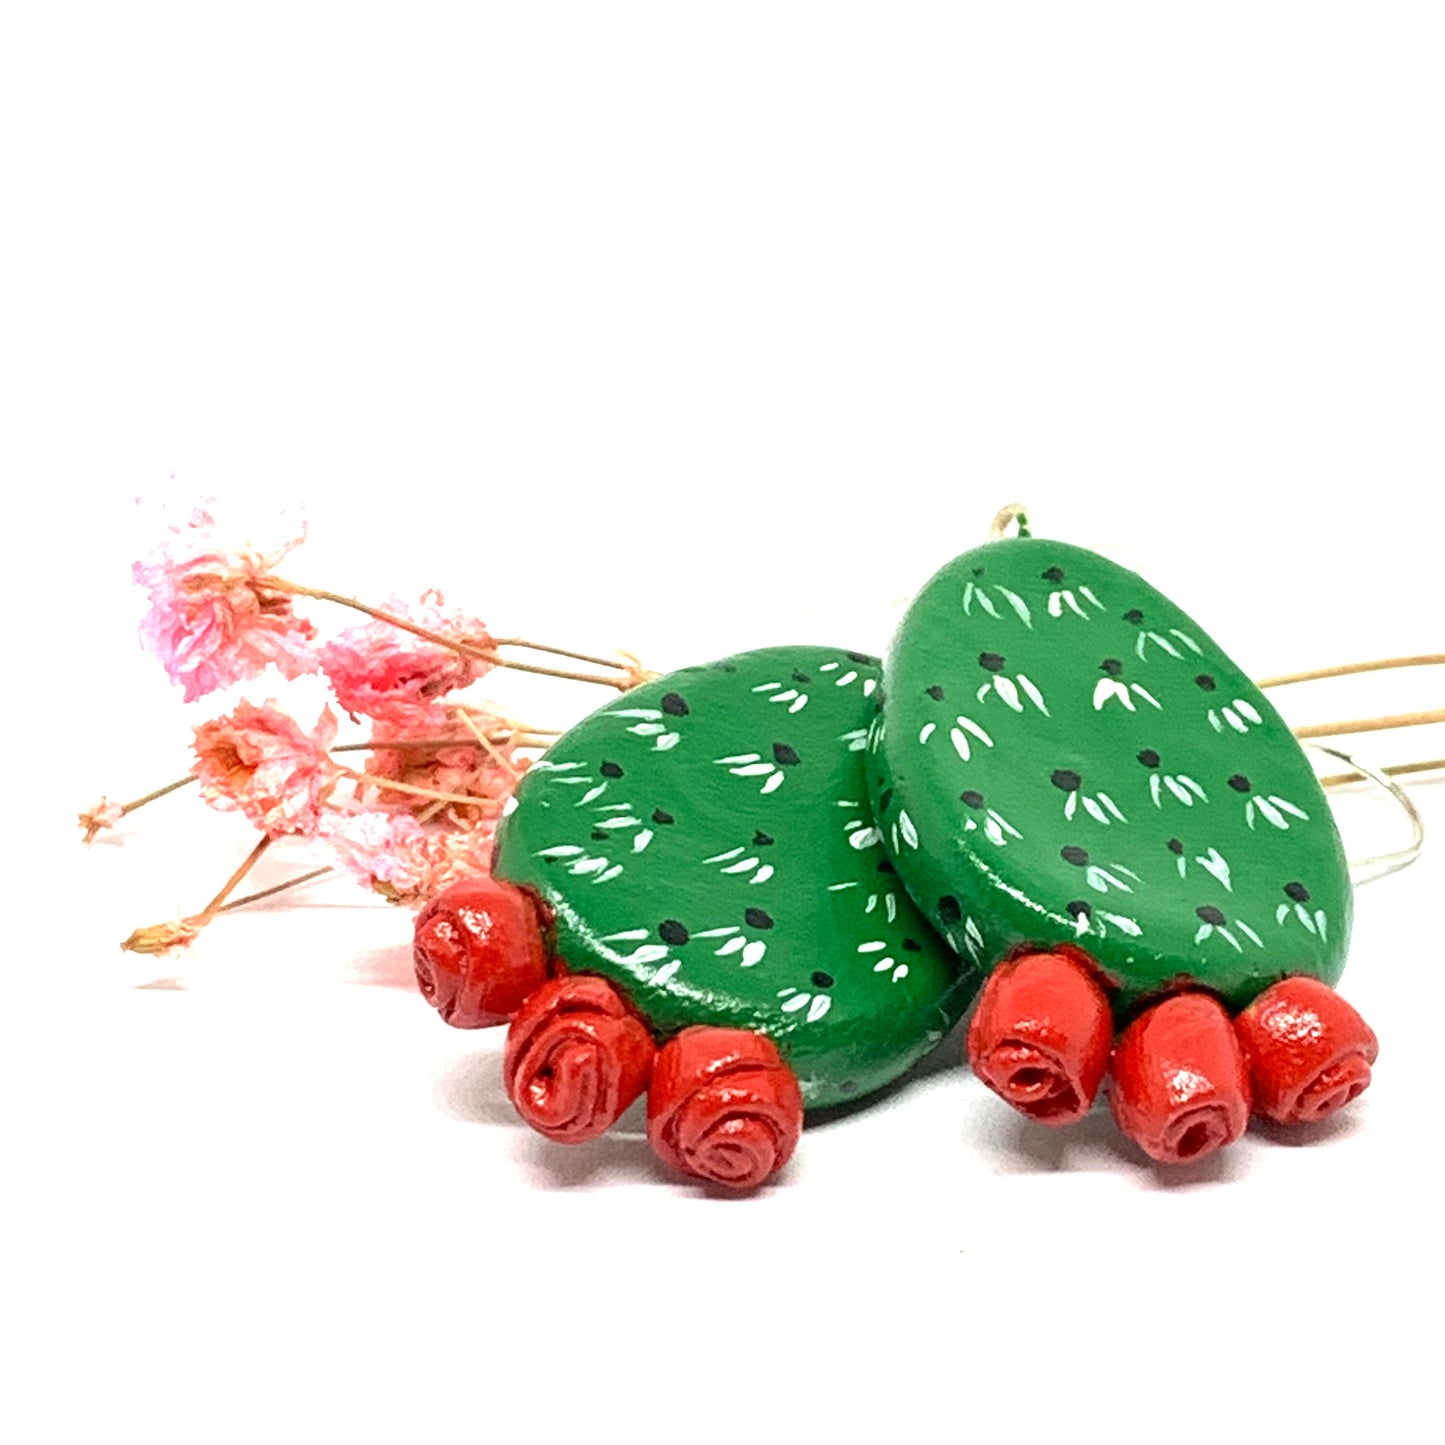 Trendy Clay Cactus Earrings Ethnic Artisan Desiged Hand Painted Mexico Art to Wear Girl Fashion Food Jewelry Mexican Nopales Aretes de Mujer